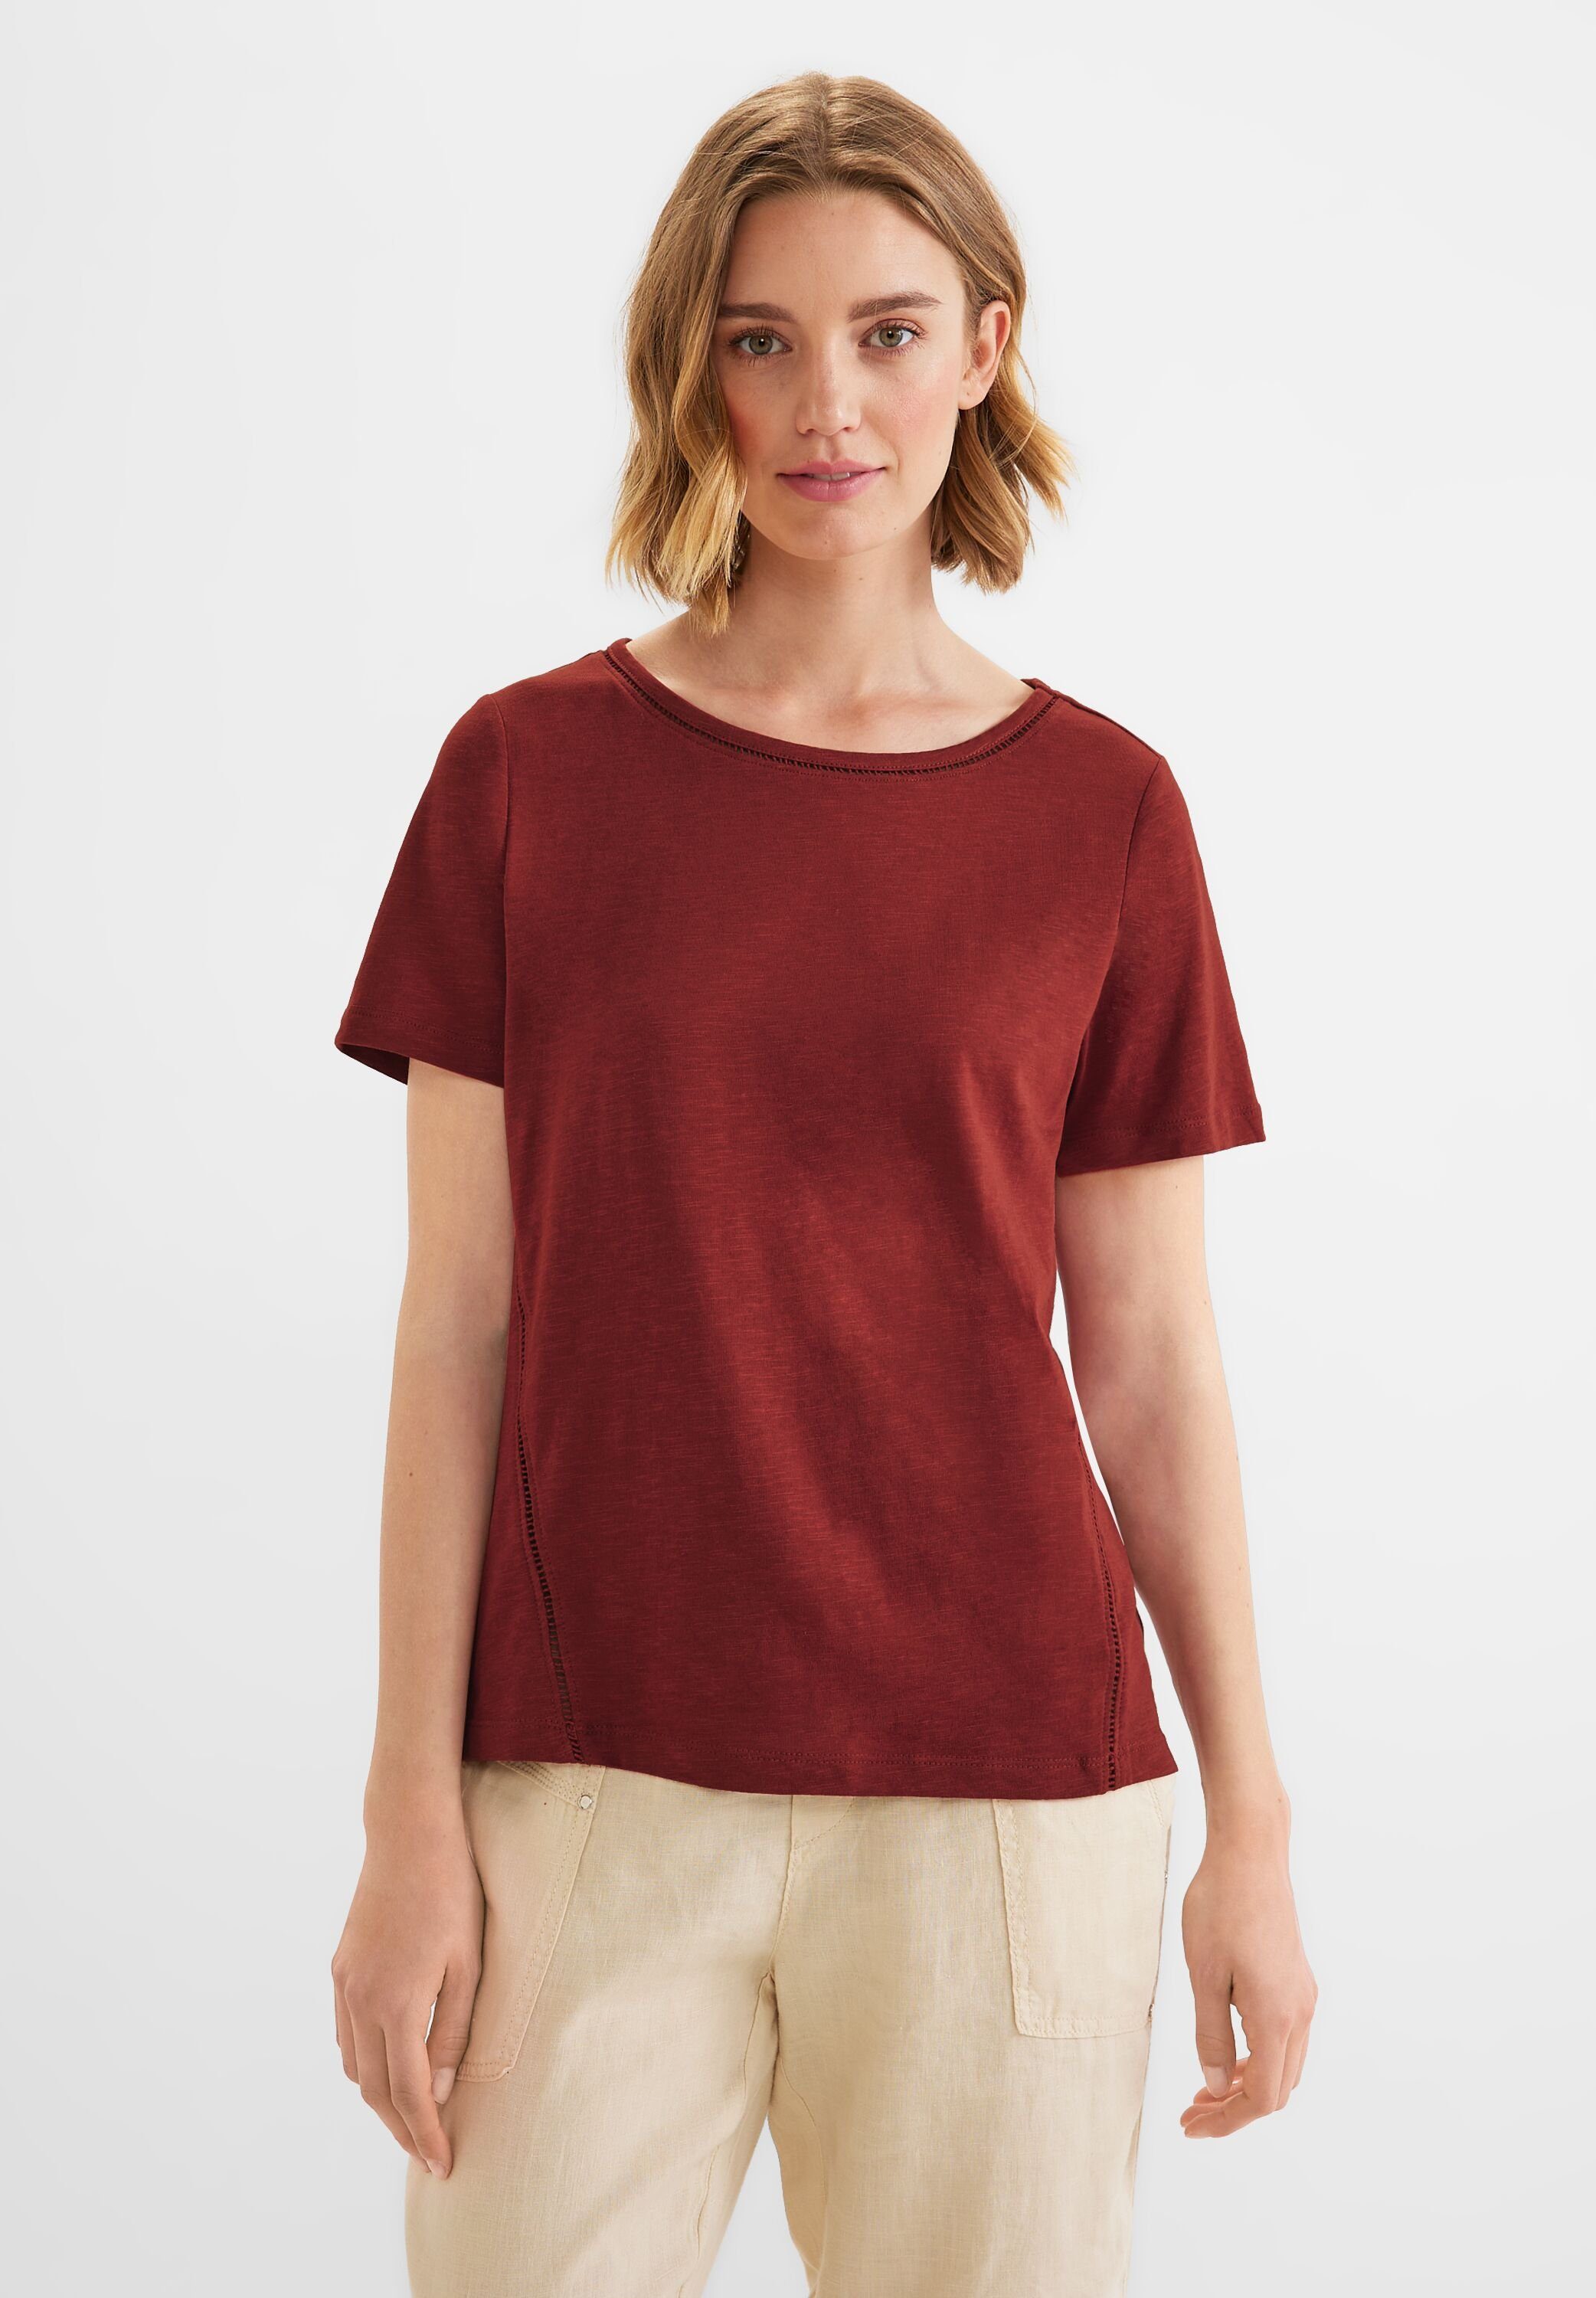 red STREET T-Shirt Unifarbe foxy ONE in